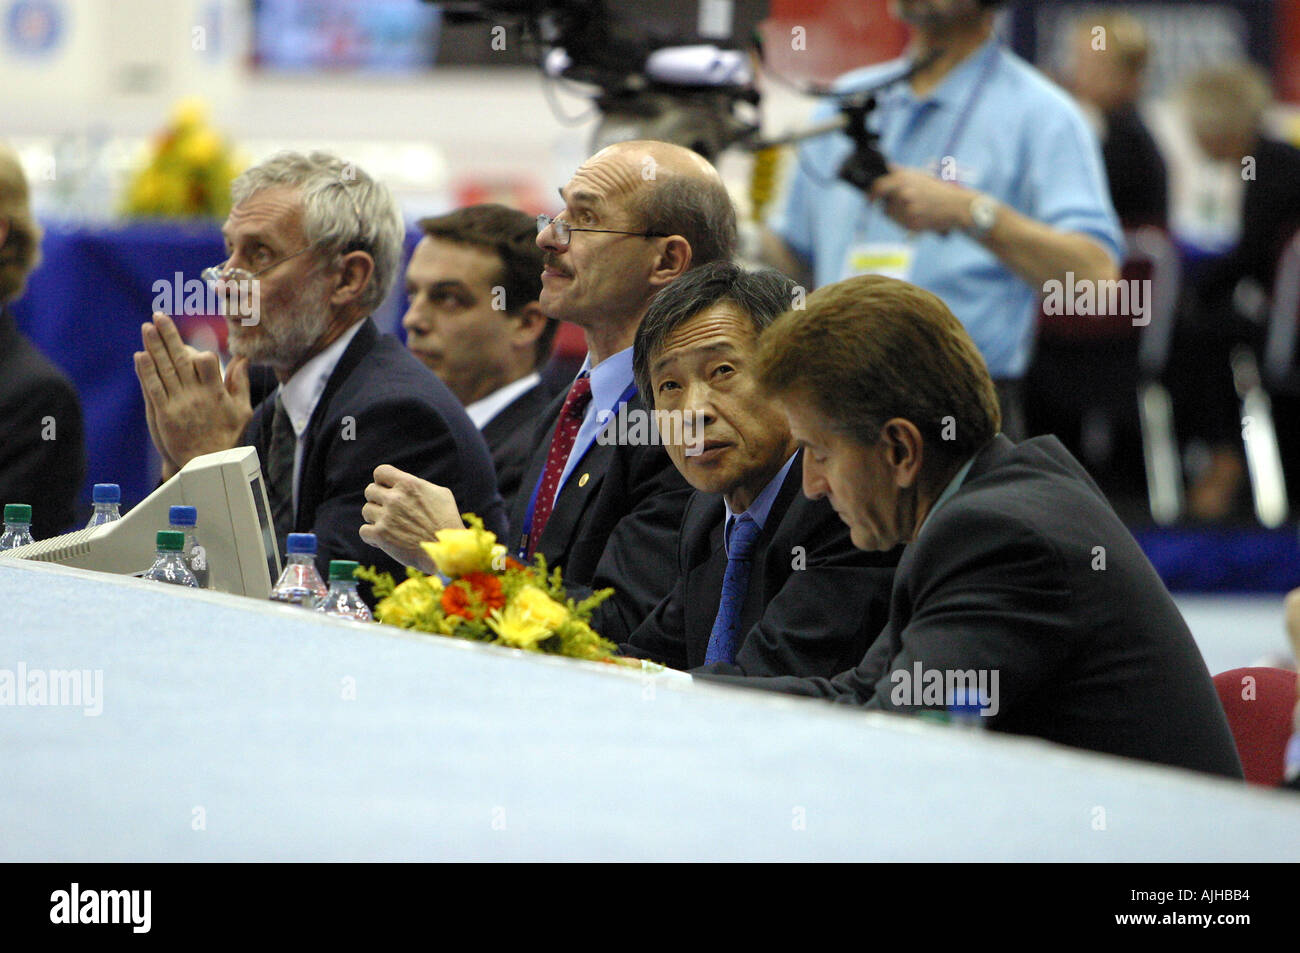 gymnastics judges deliberate on a score in a mens world  gymnastics competition Stock Photo